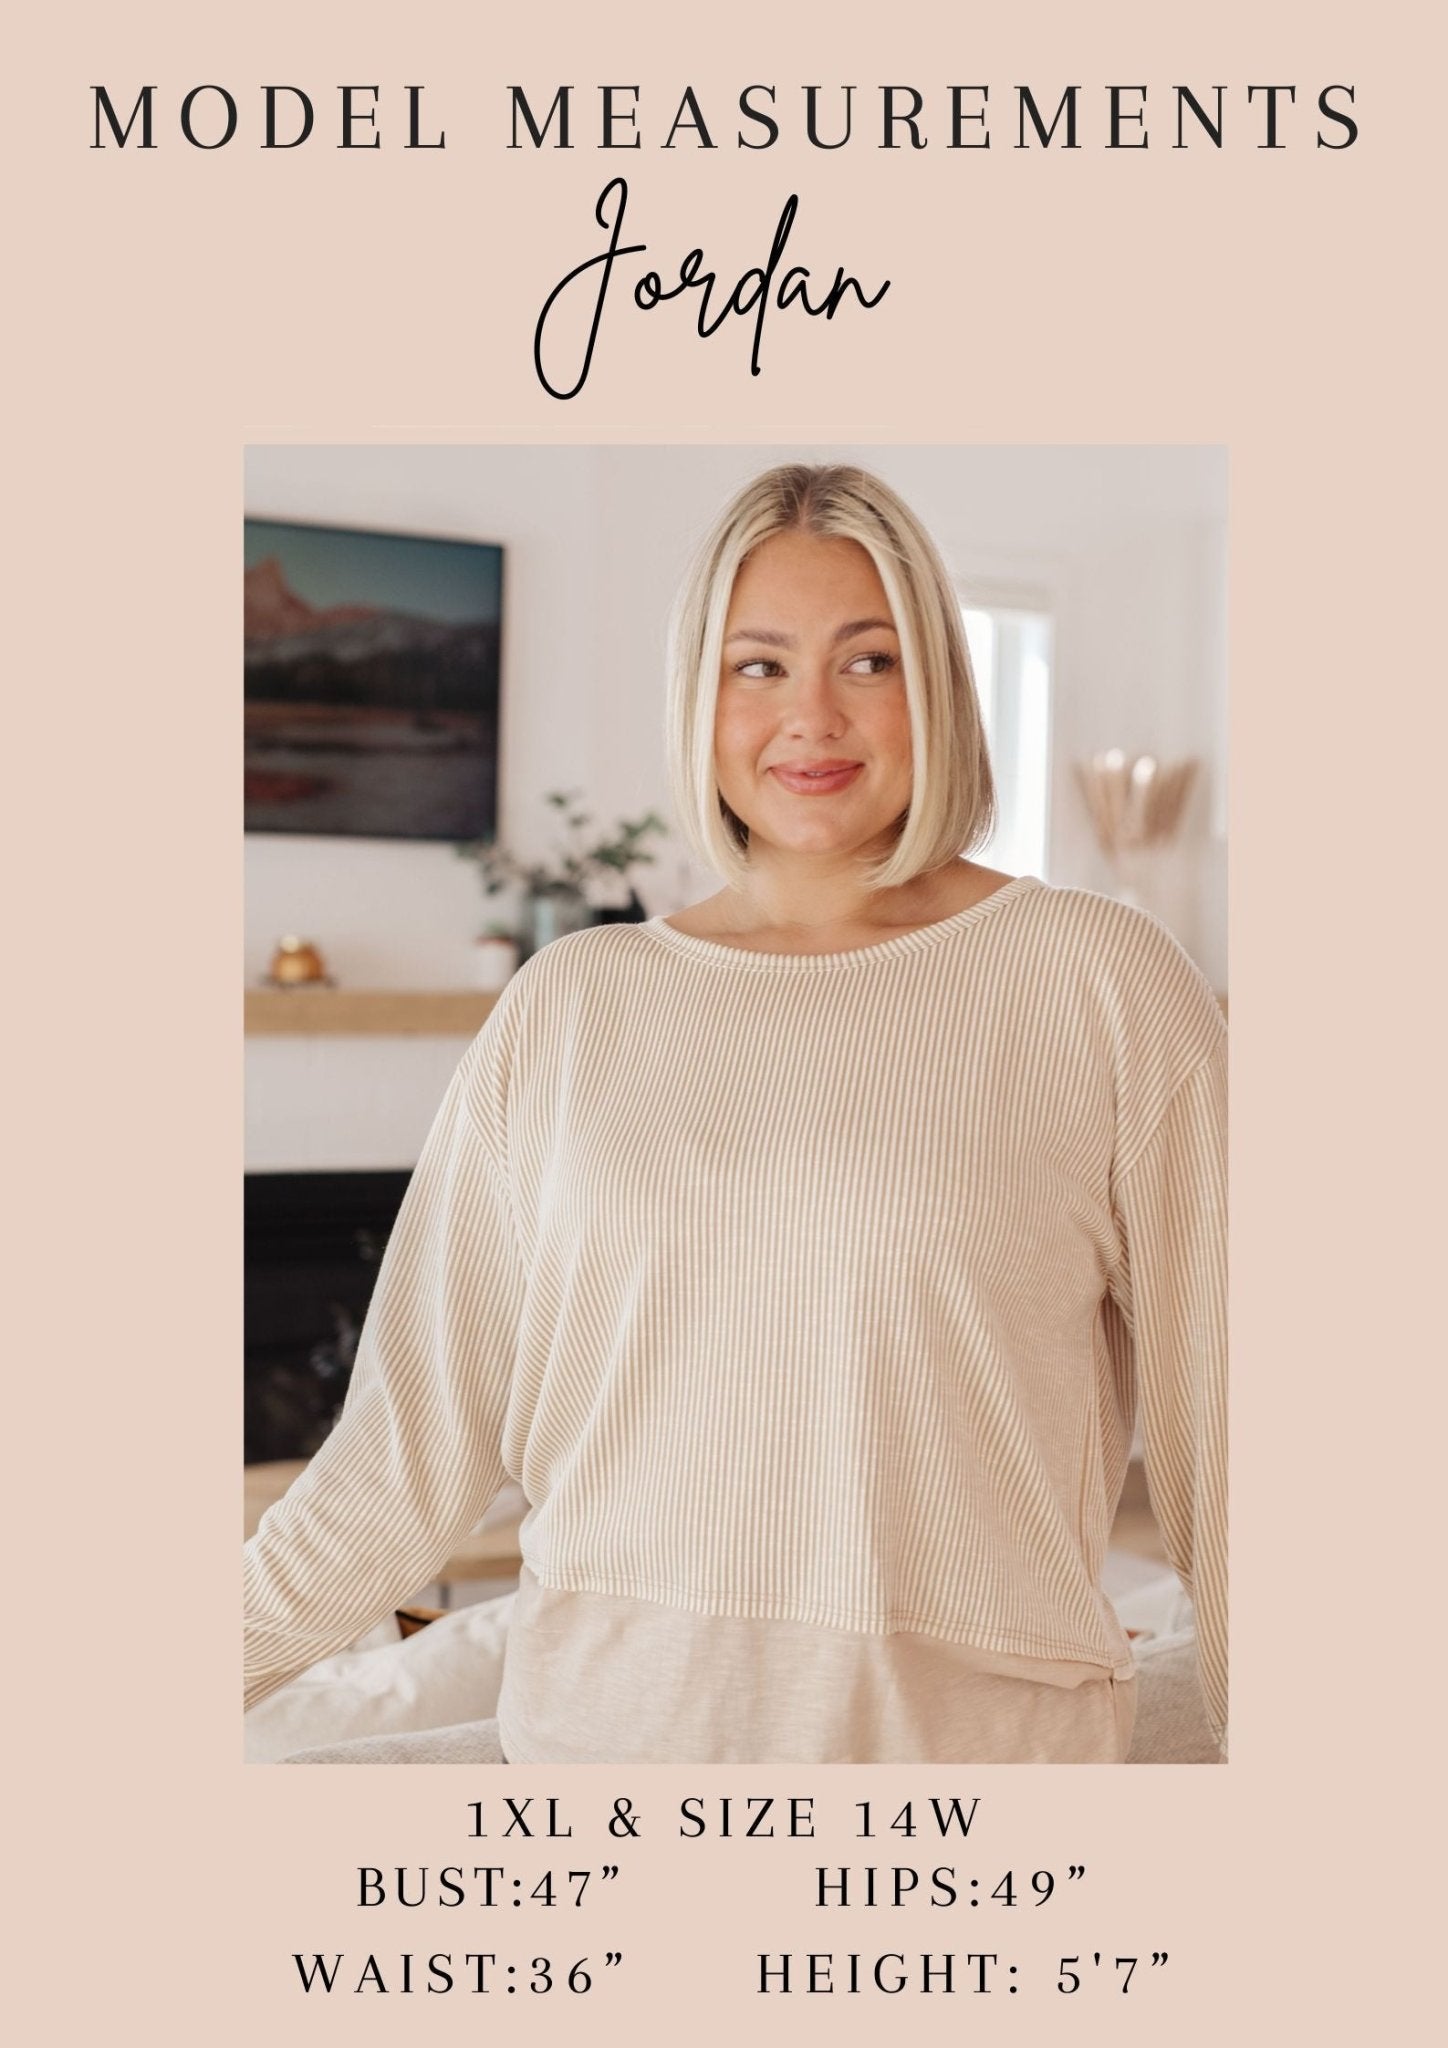 I'm A Sucker For You Valentine Pullover - PEONIES & LIME